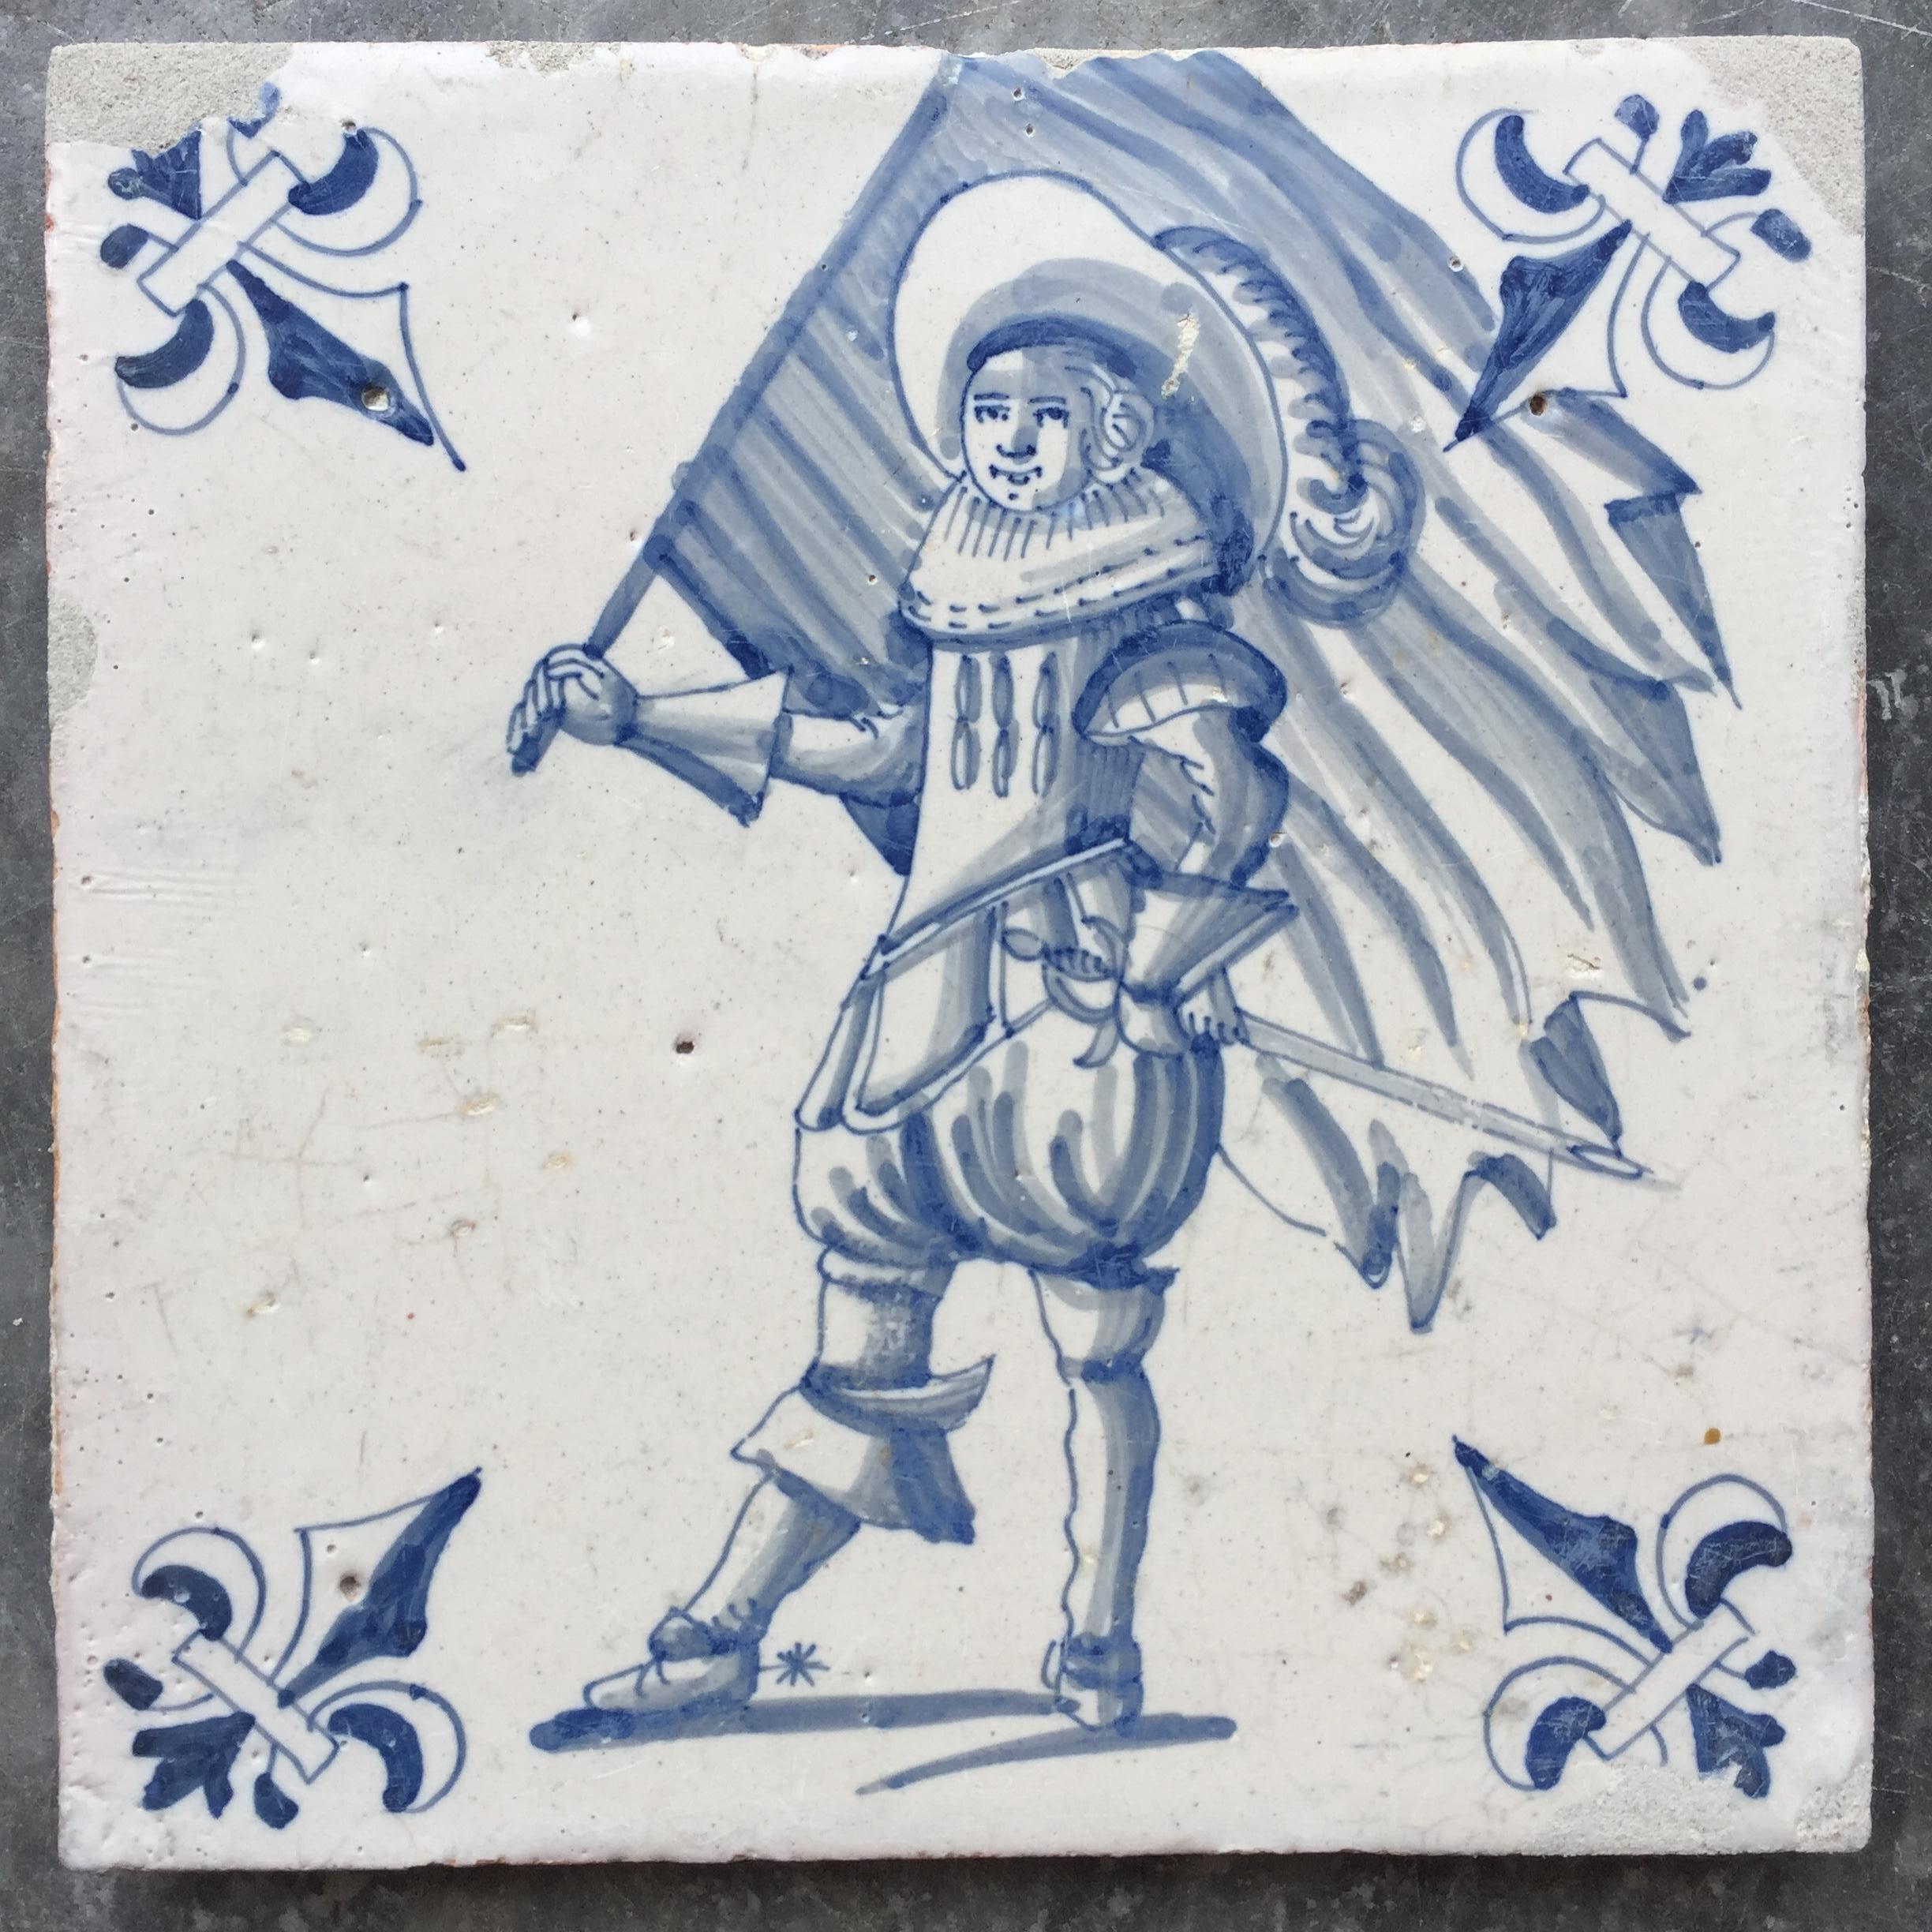 Exceptional Set of 20 Blue and White Dutch Delft Tiles with Figures 1